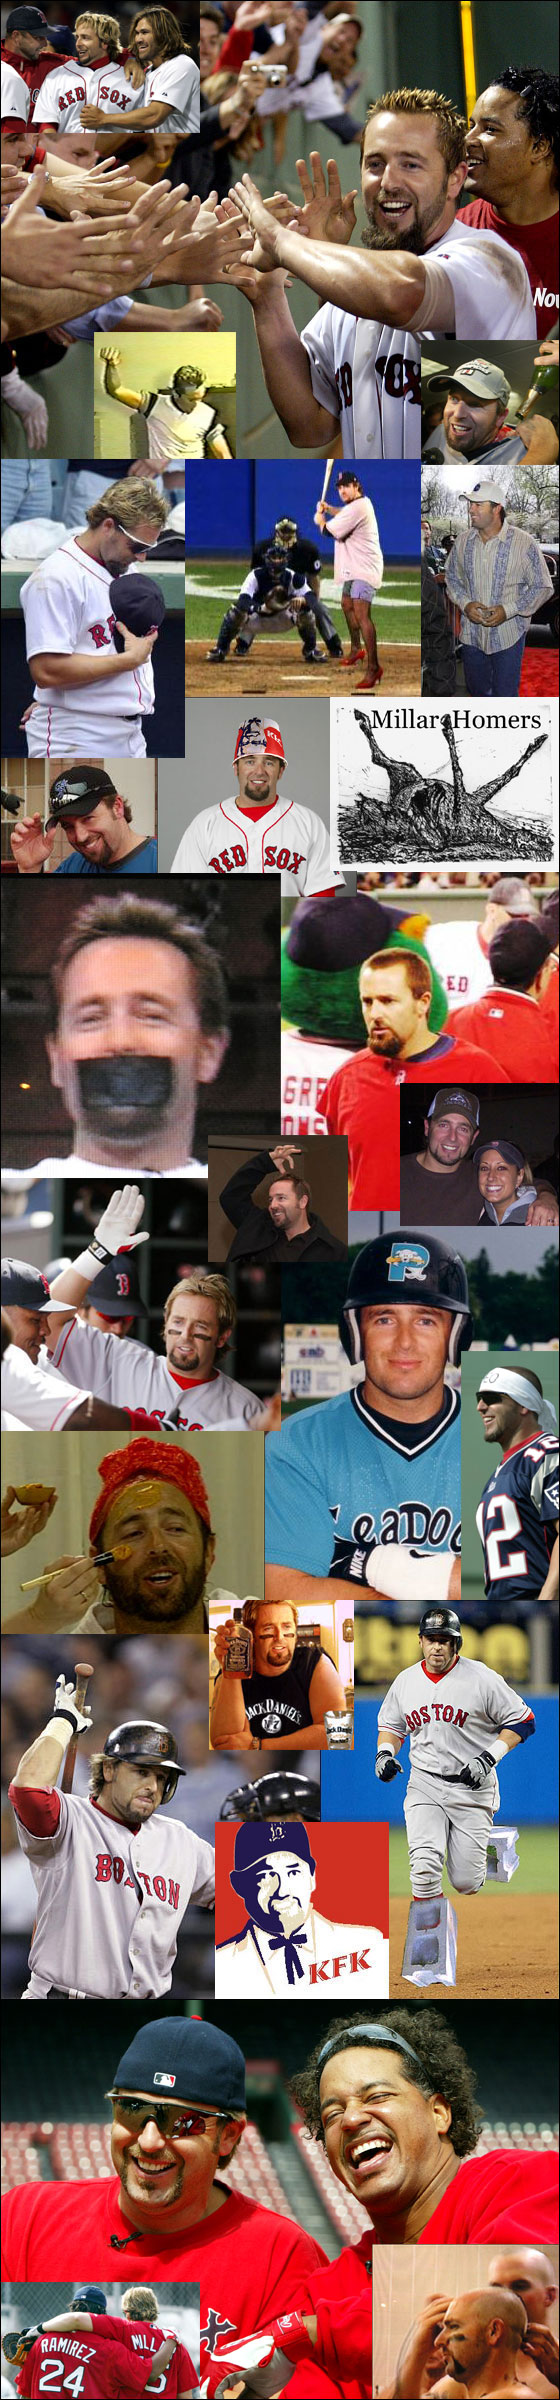 Boston Dirt Dogs: Thanks for the memories... and all the fun Kevin